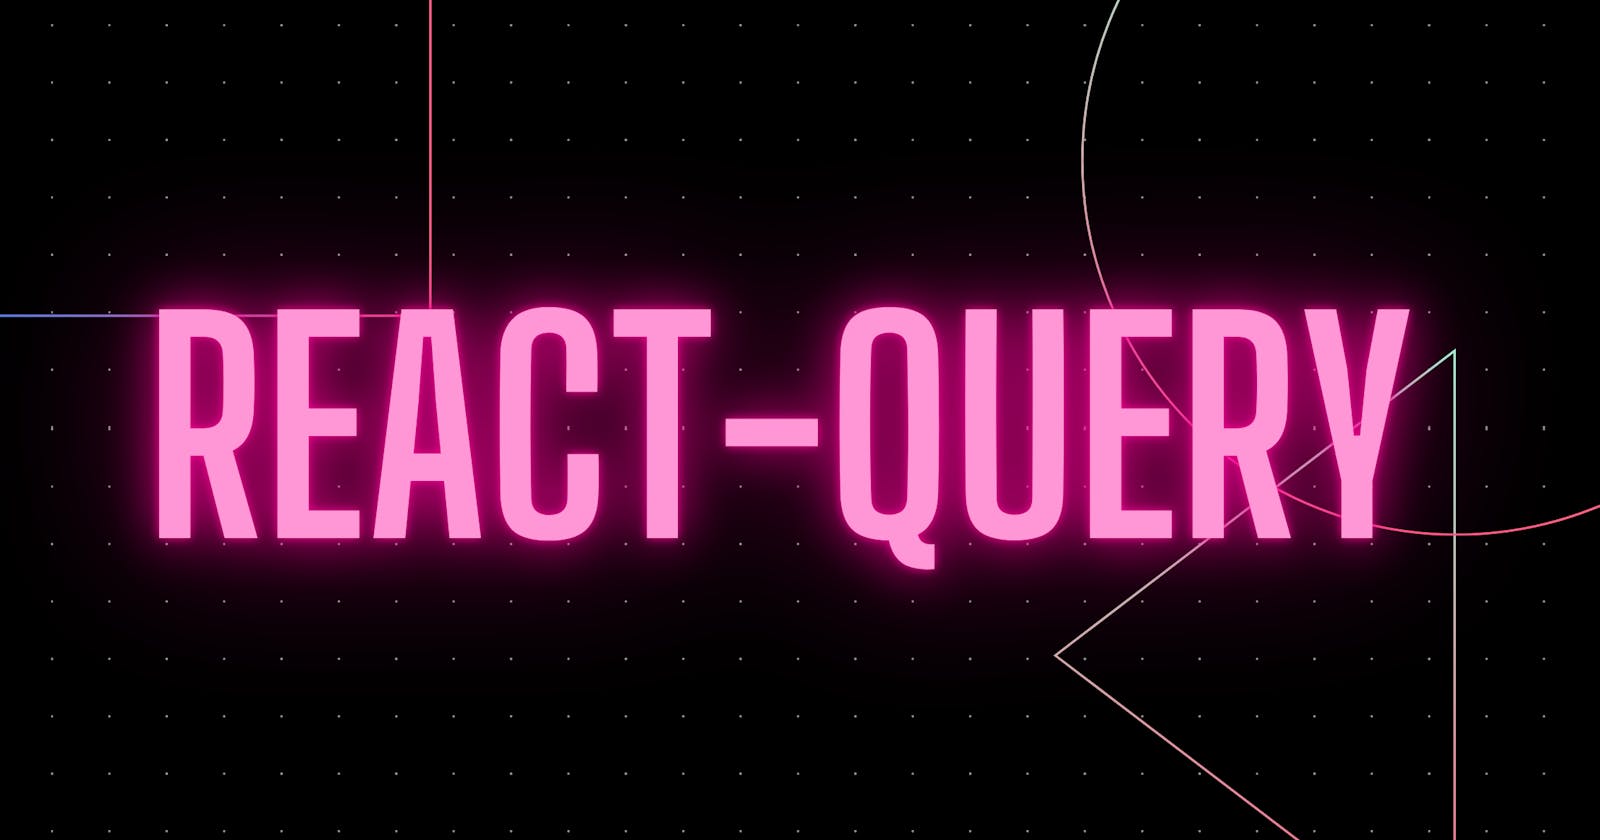 Why I use React Query